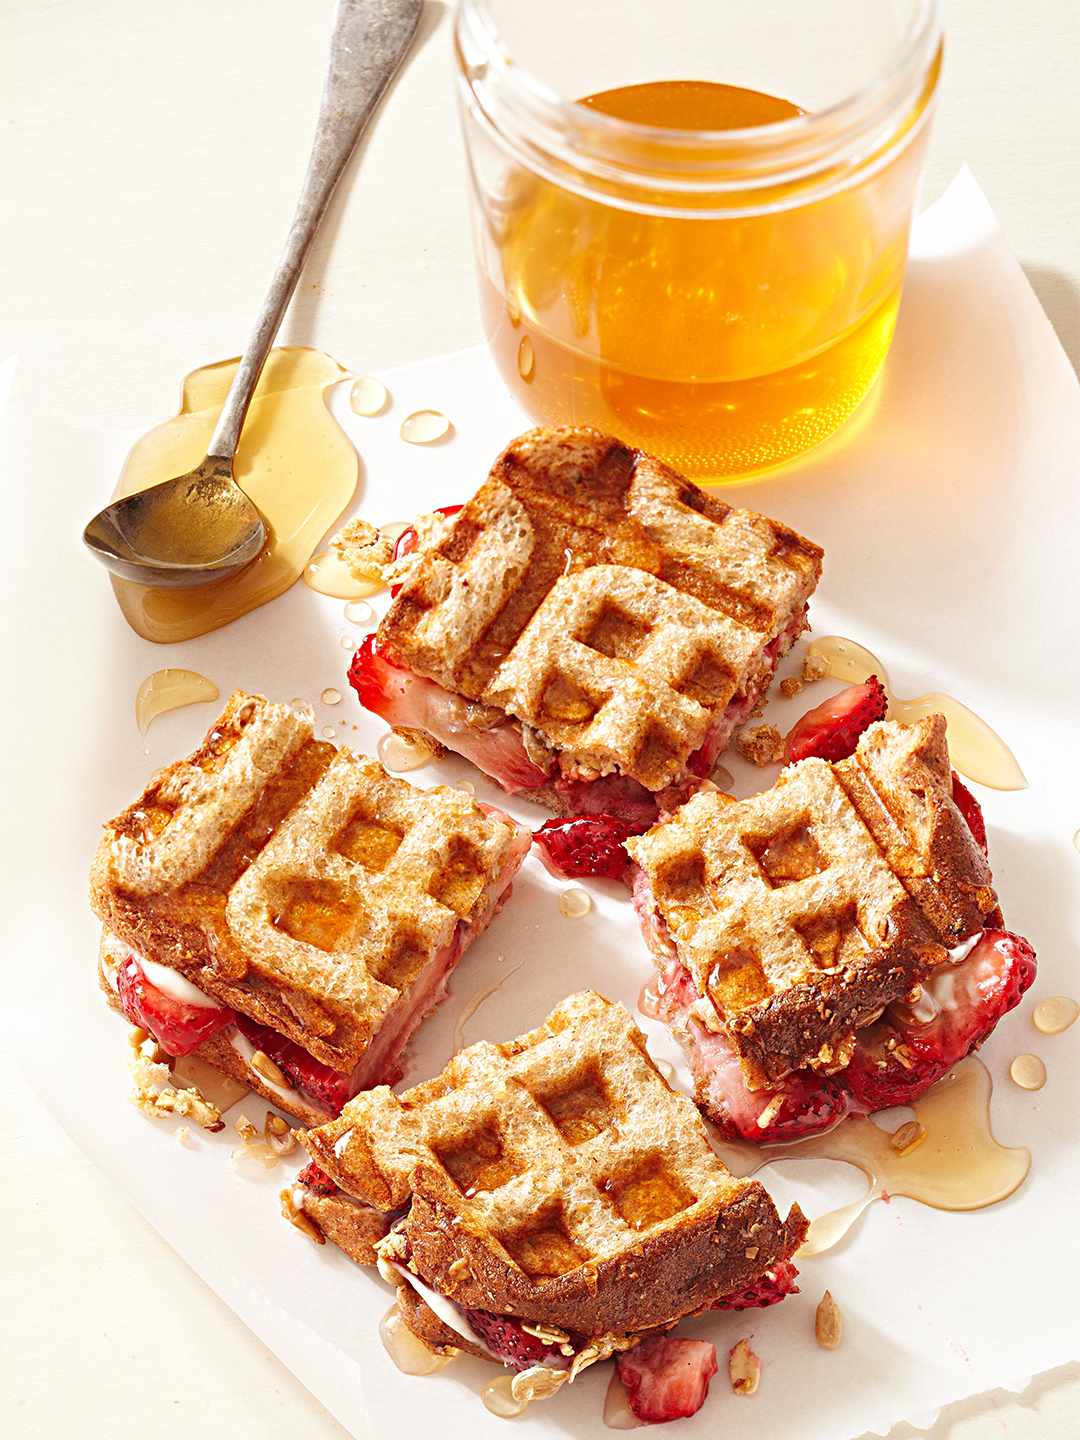 Strawberries and Cream Waffle Sandwiches with honey